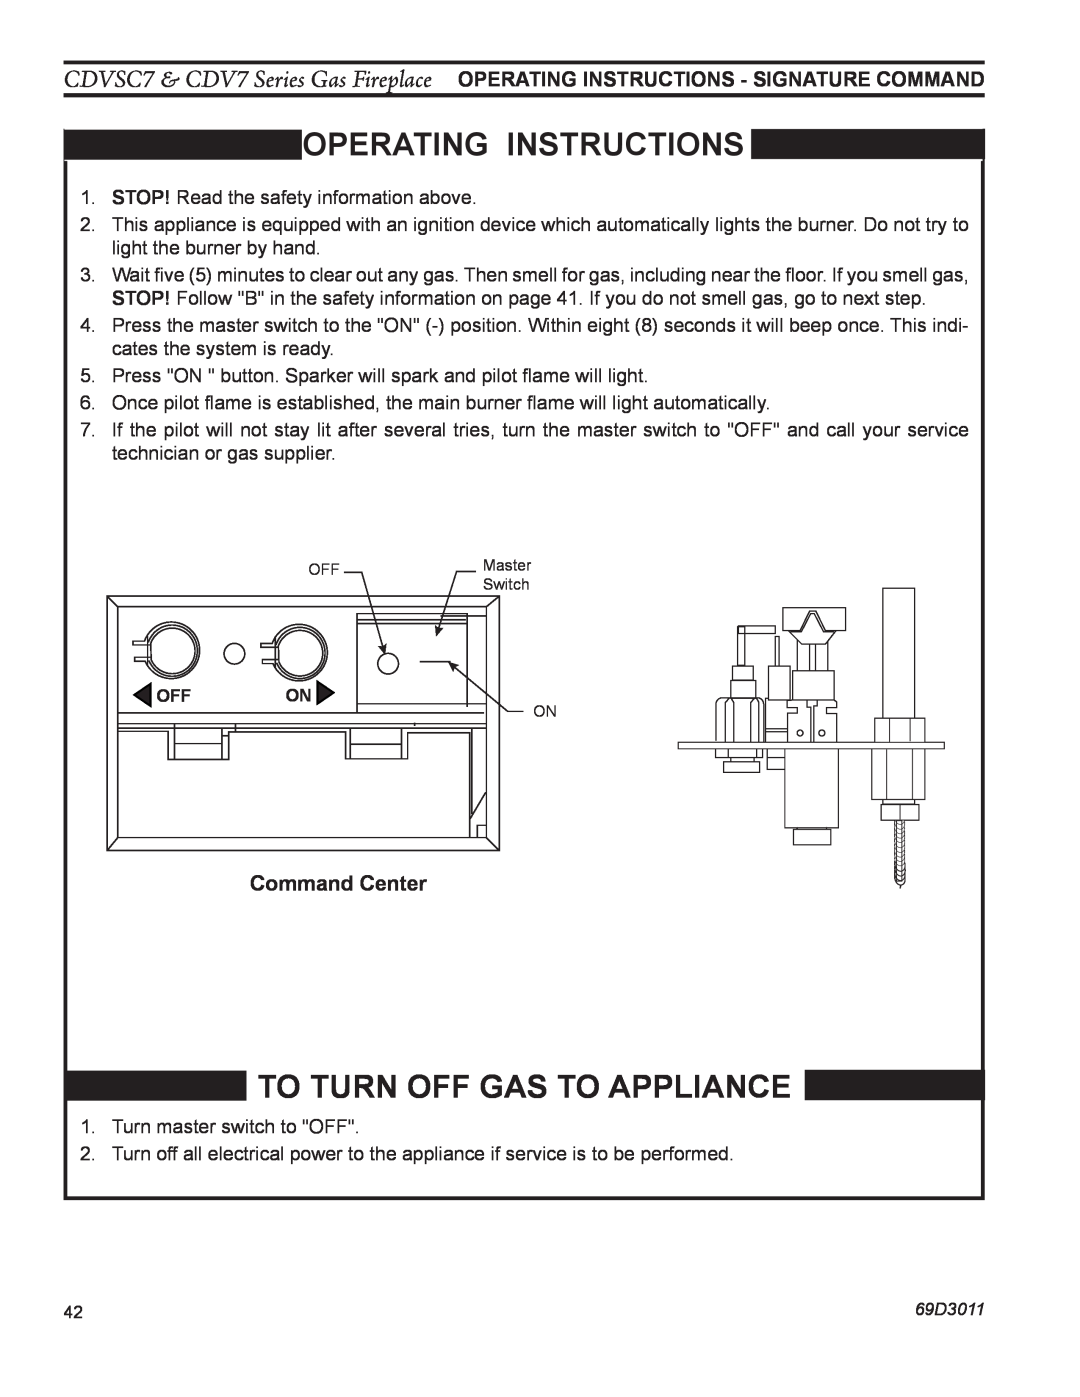 Monessen Hearth CDV7 manual OPERATing INSTRUCTIONS, To Turn Off Gas To Appliance, Command Center 